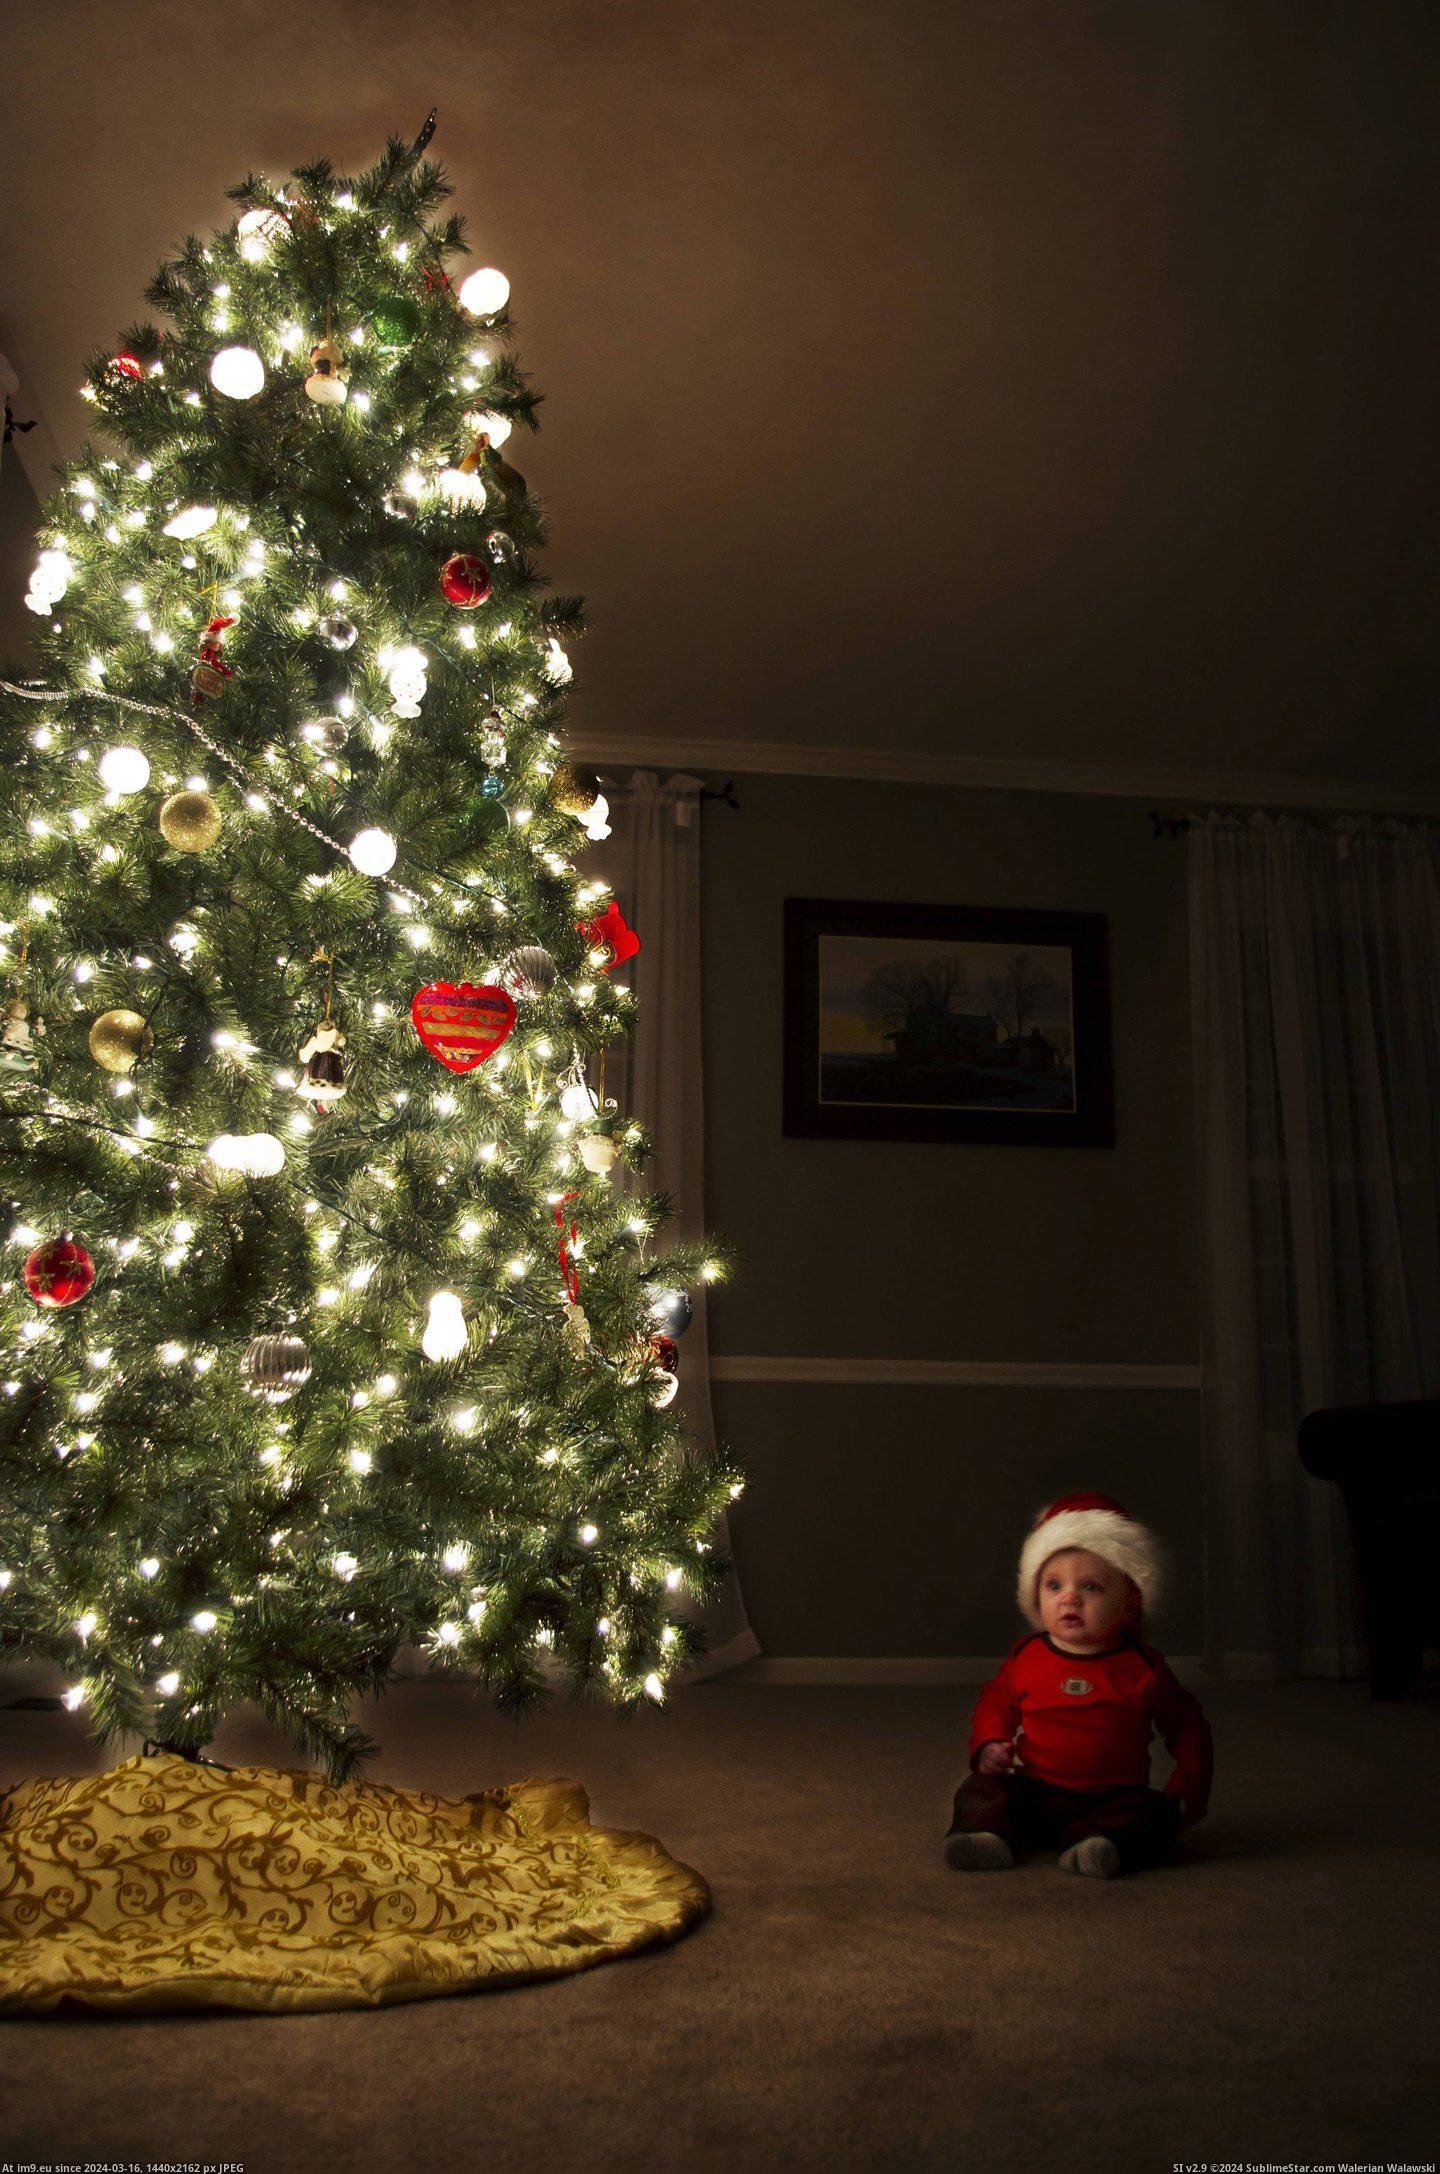 #Was #Good #Shot #Wanted #Him #Son #Metric #Out #Christmas #Get [Pics] My first post. This is my son's first Christmas and I wanted to get a good shot of him. This was the best out of a metric Pic. (Image of album My r/PICS favs))